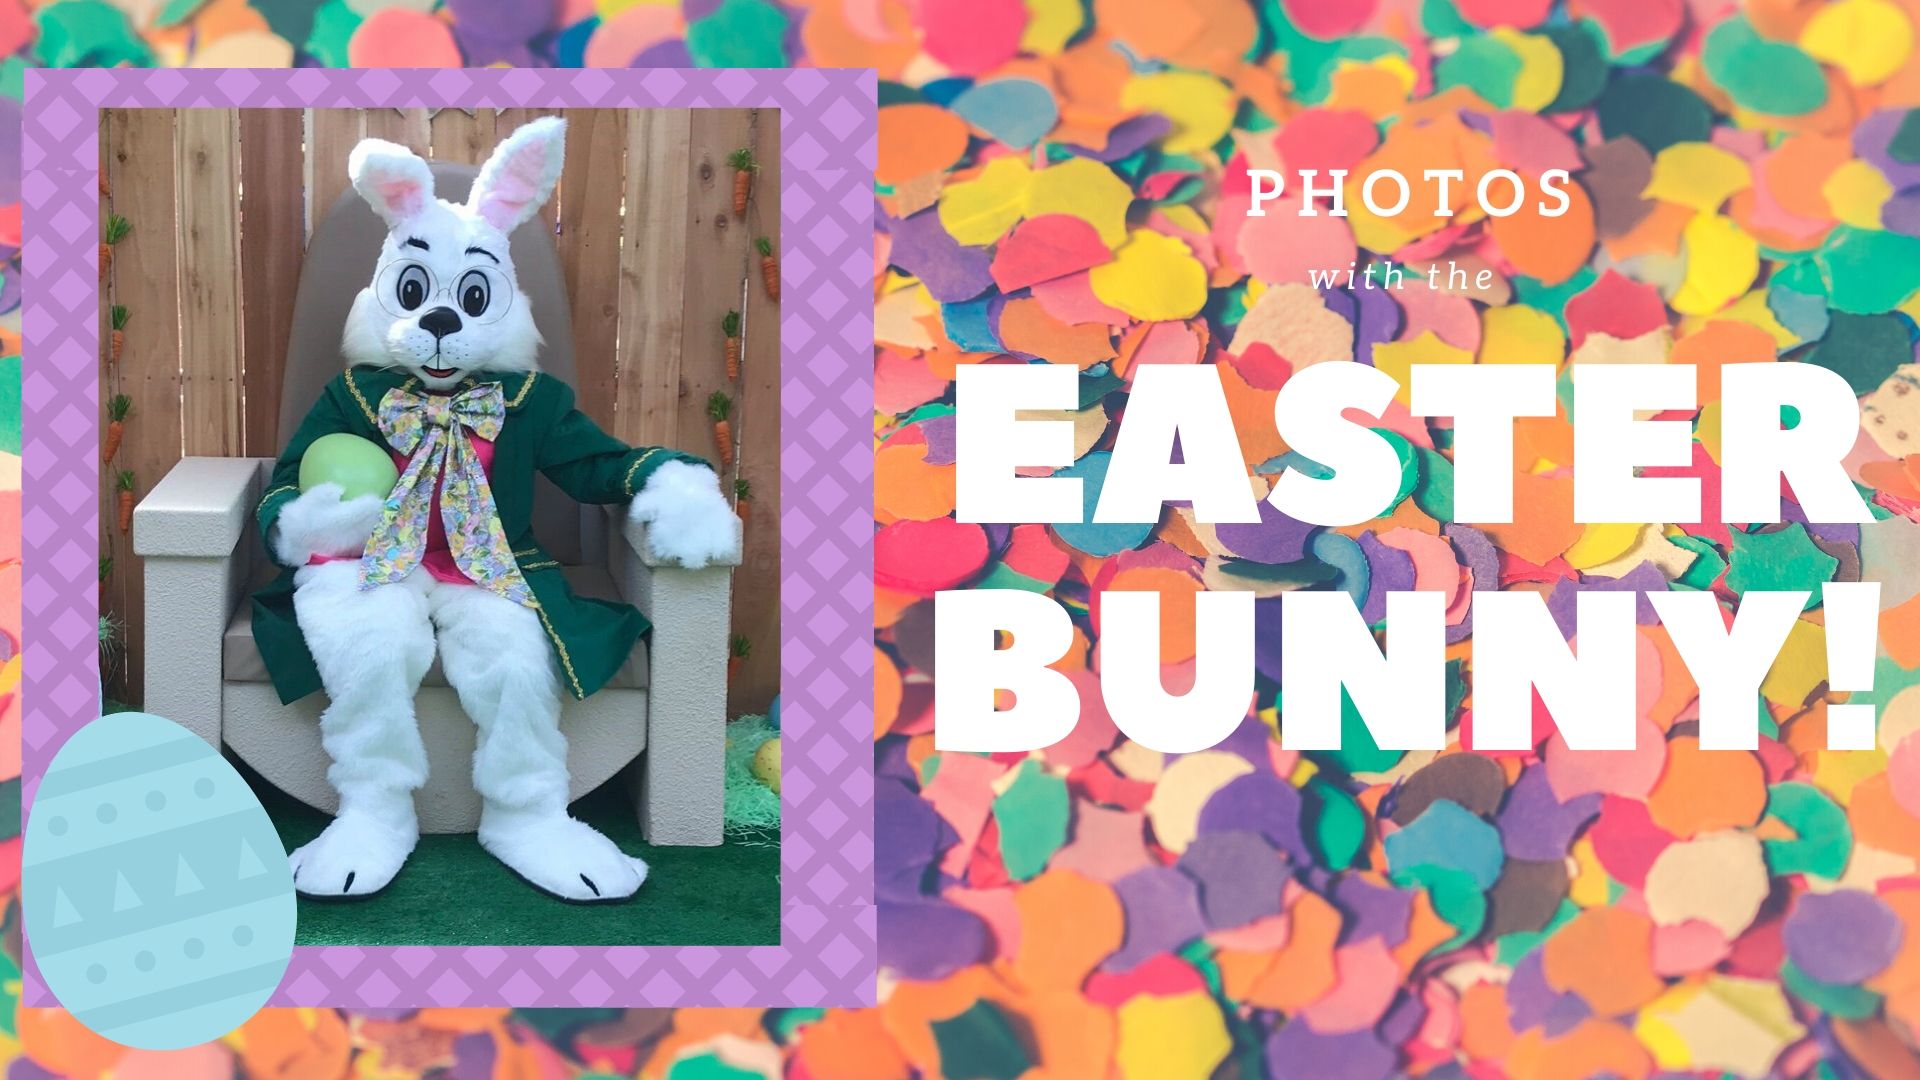 Easter bunny holding an egg with confetti back ground